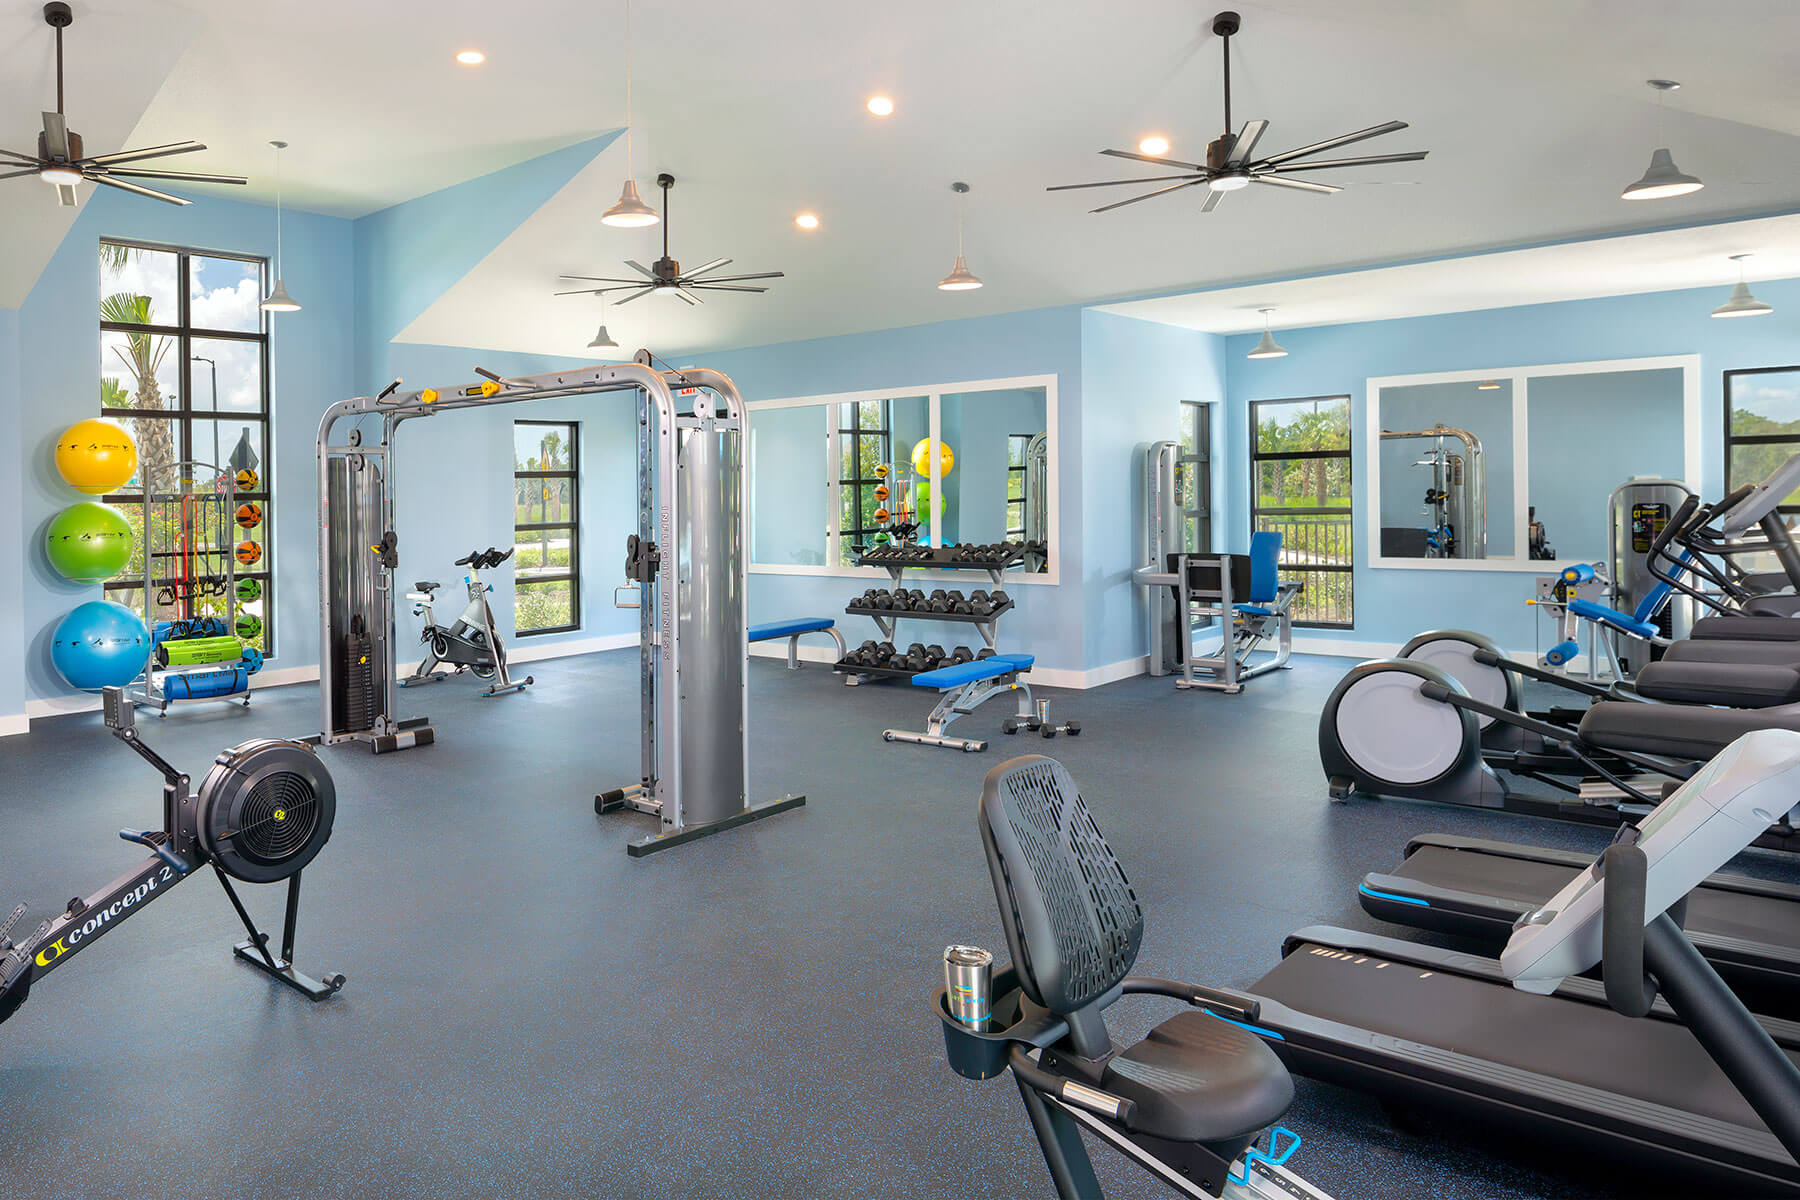 Fitness Center at North River Ranch Parrish FL